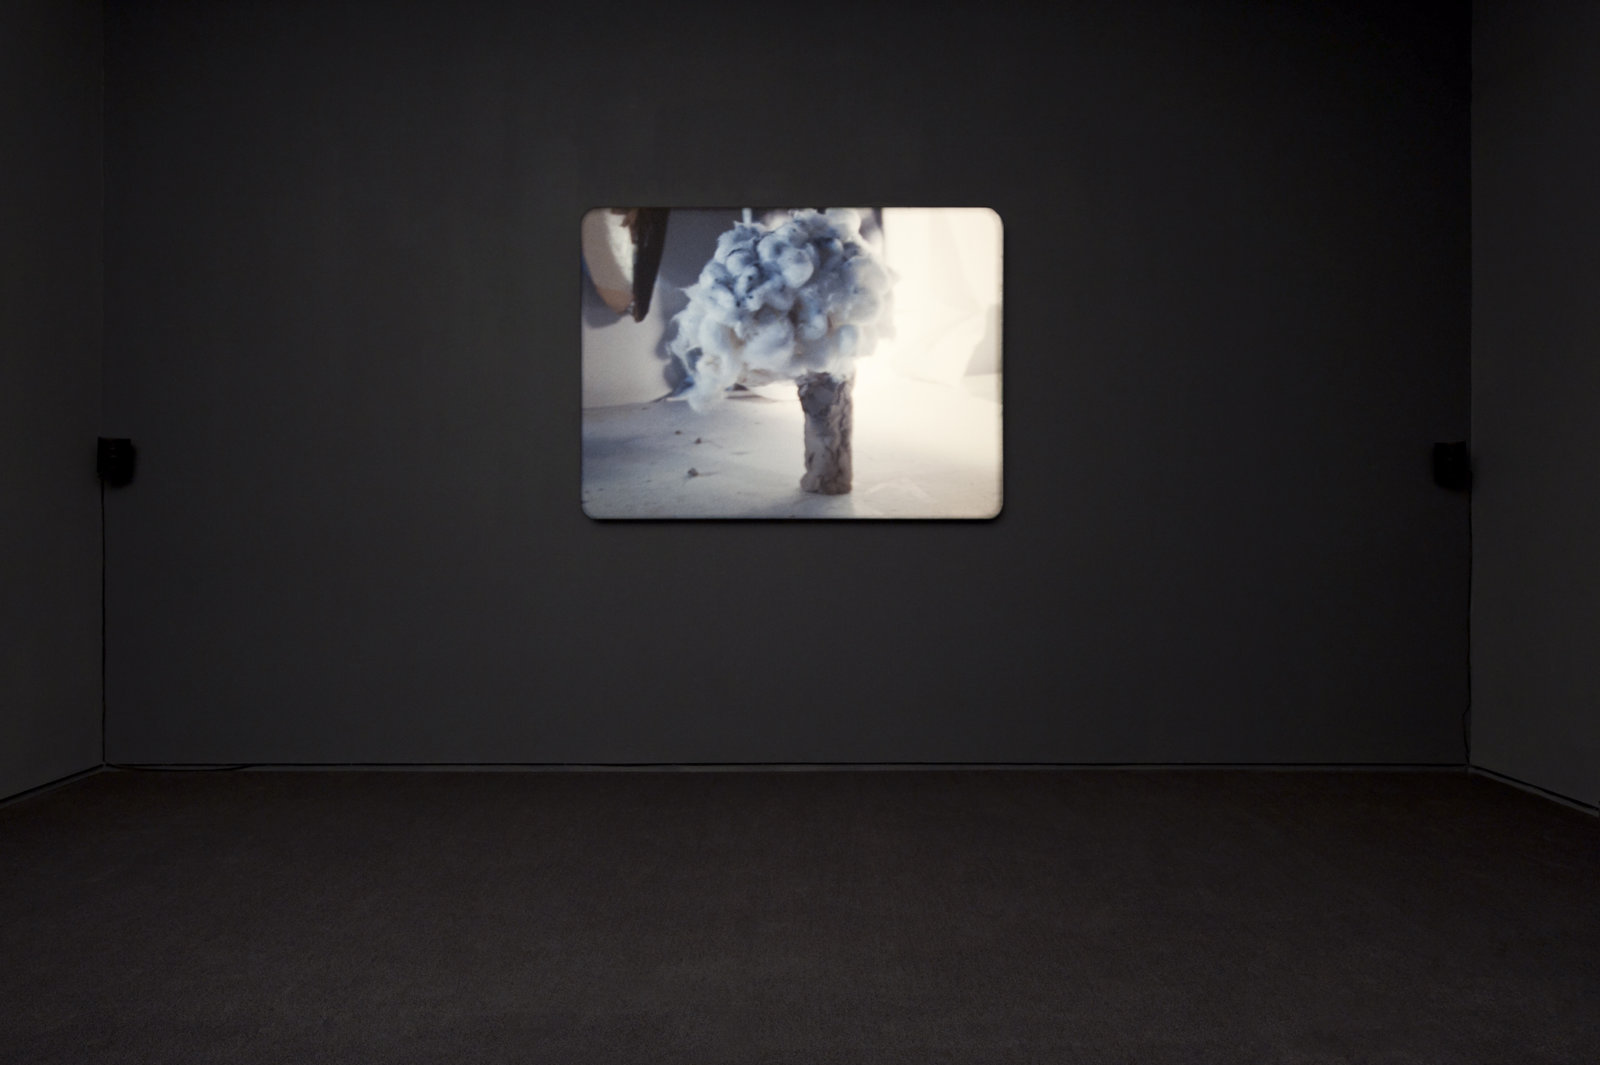 Kasper Feyrer, The artist’s studio, 2010, colour 16mm film loop with non-synchronized sound, 5 minutes, 5 seconds